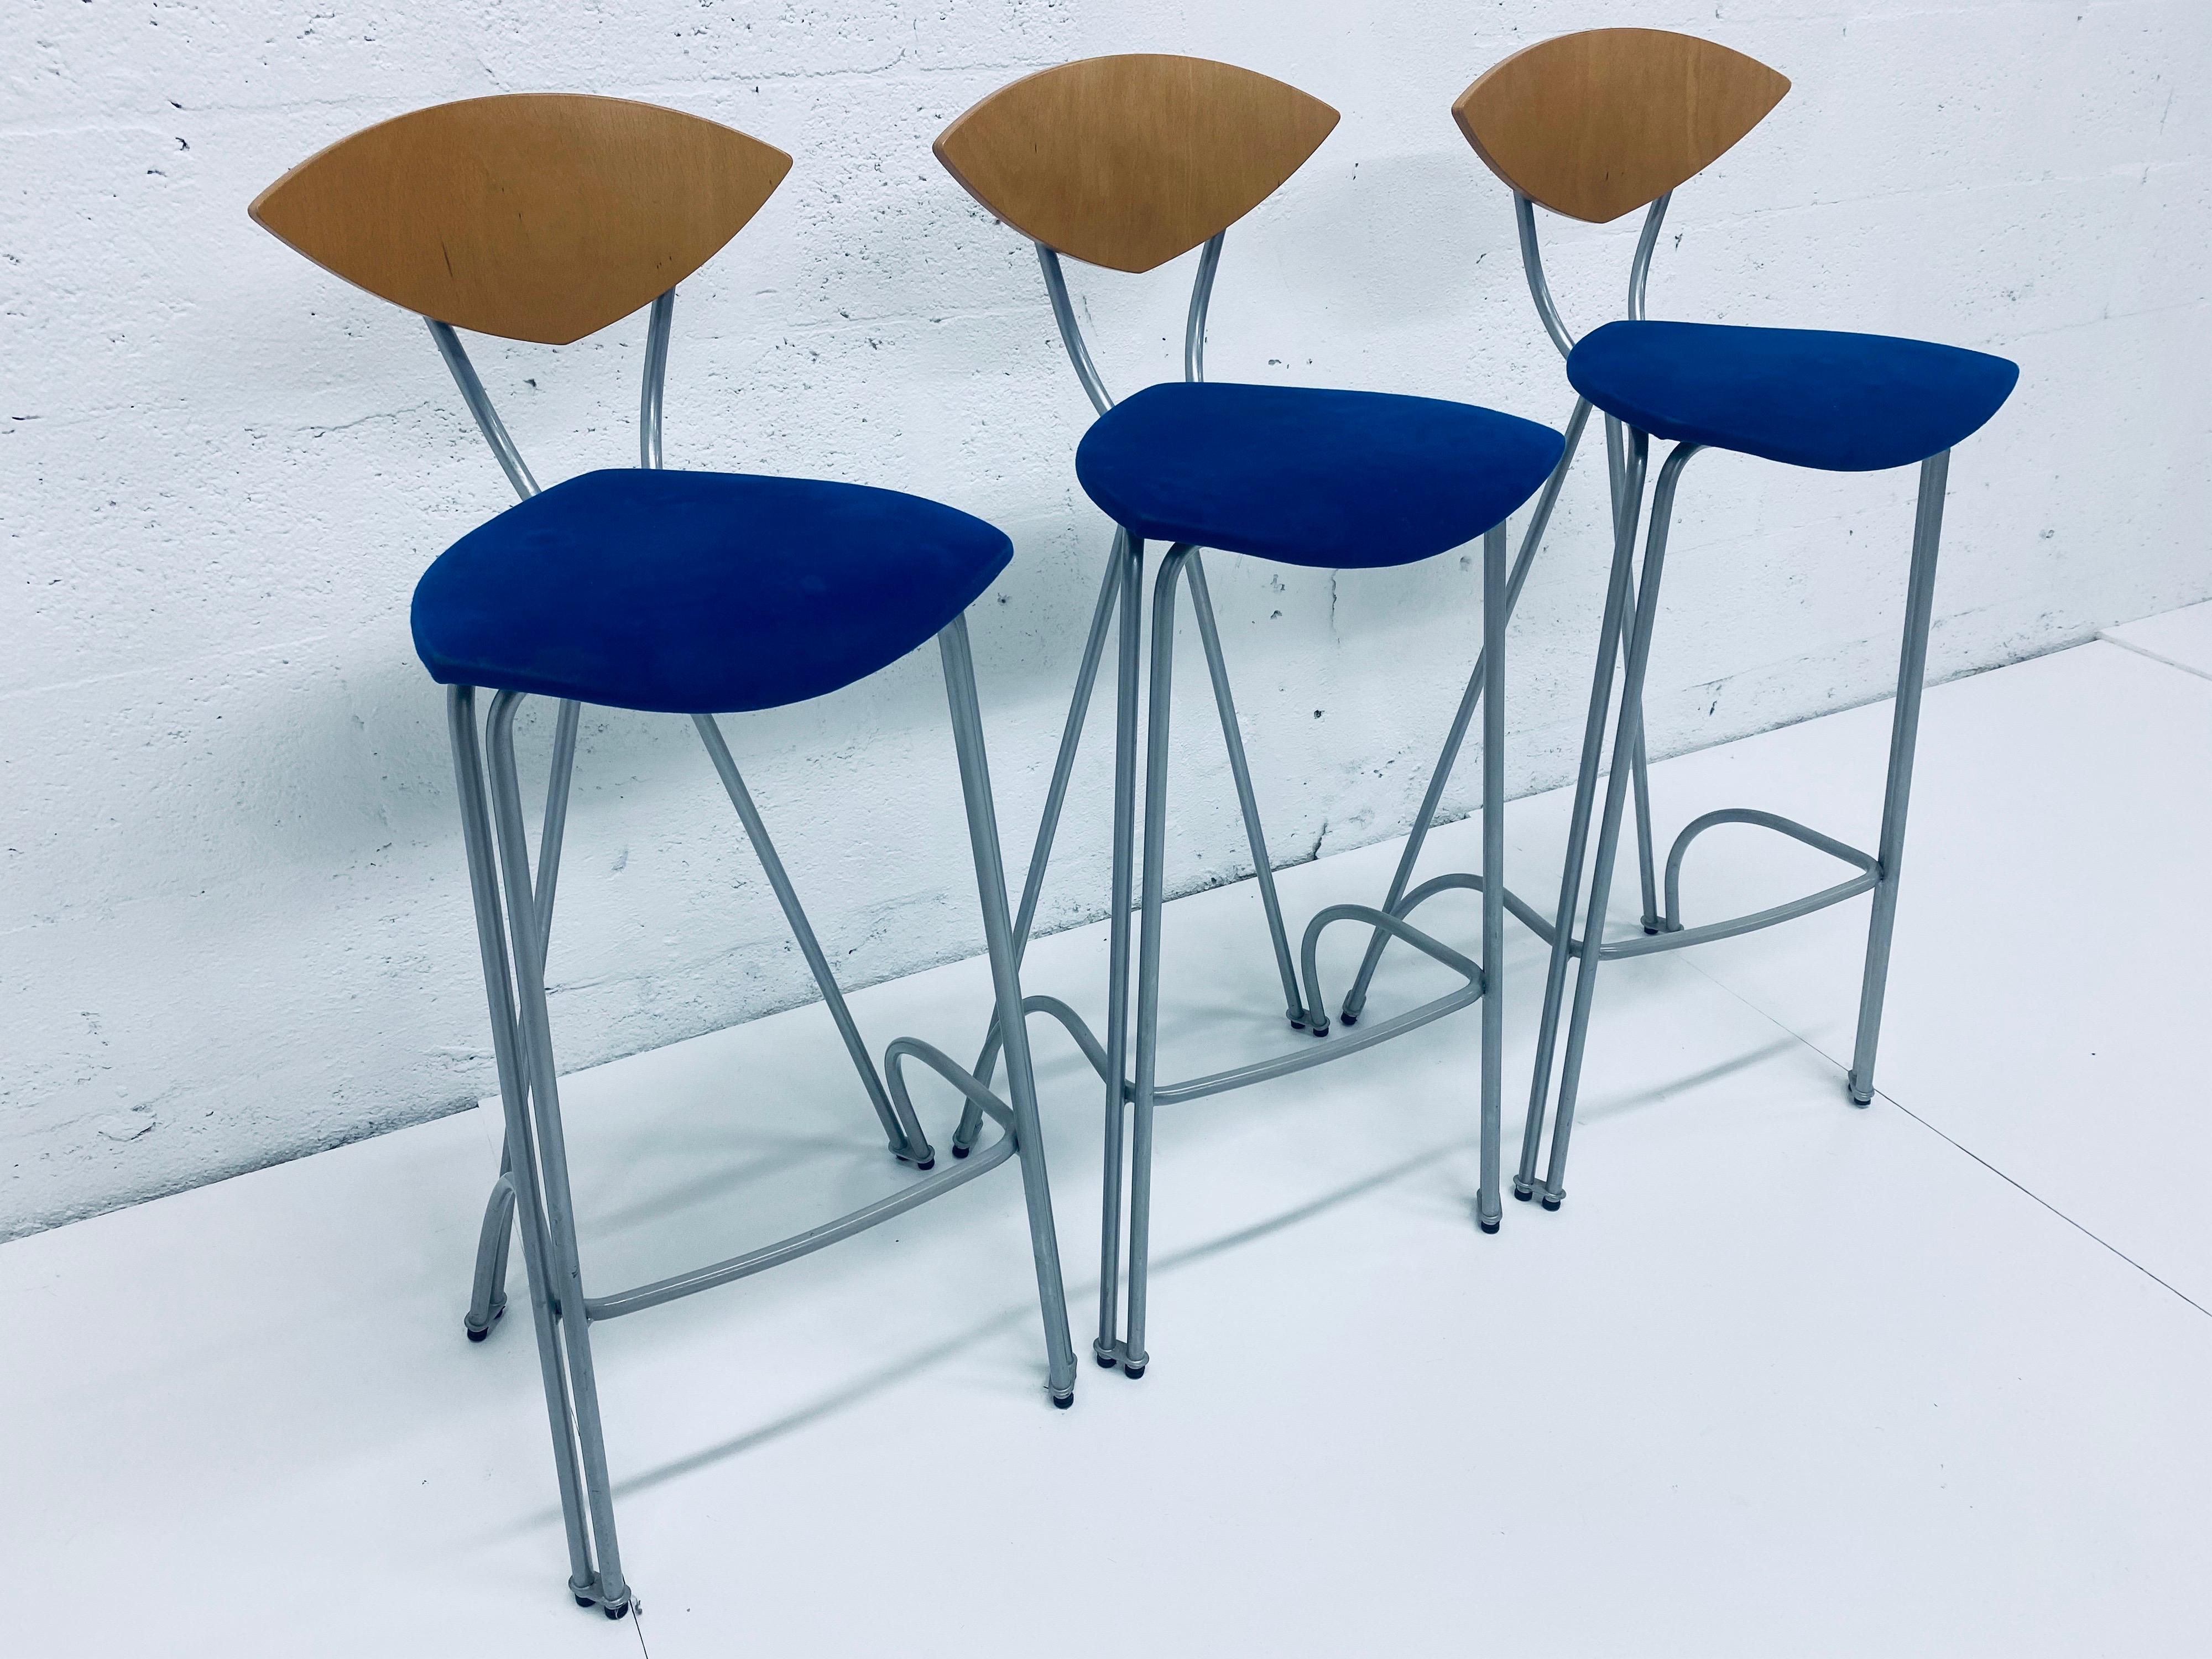 Three Postmodern barstools from the 1990s by Federico Giner, Spain. Will need new seat upholstery.